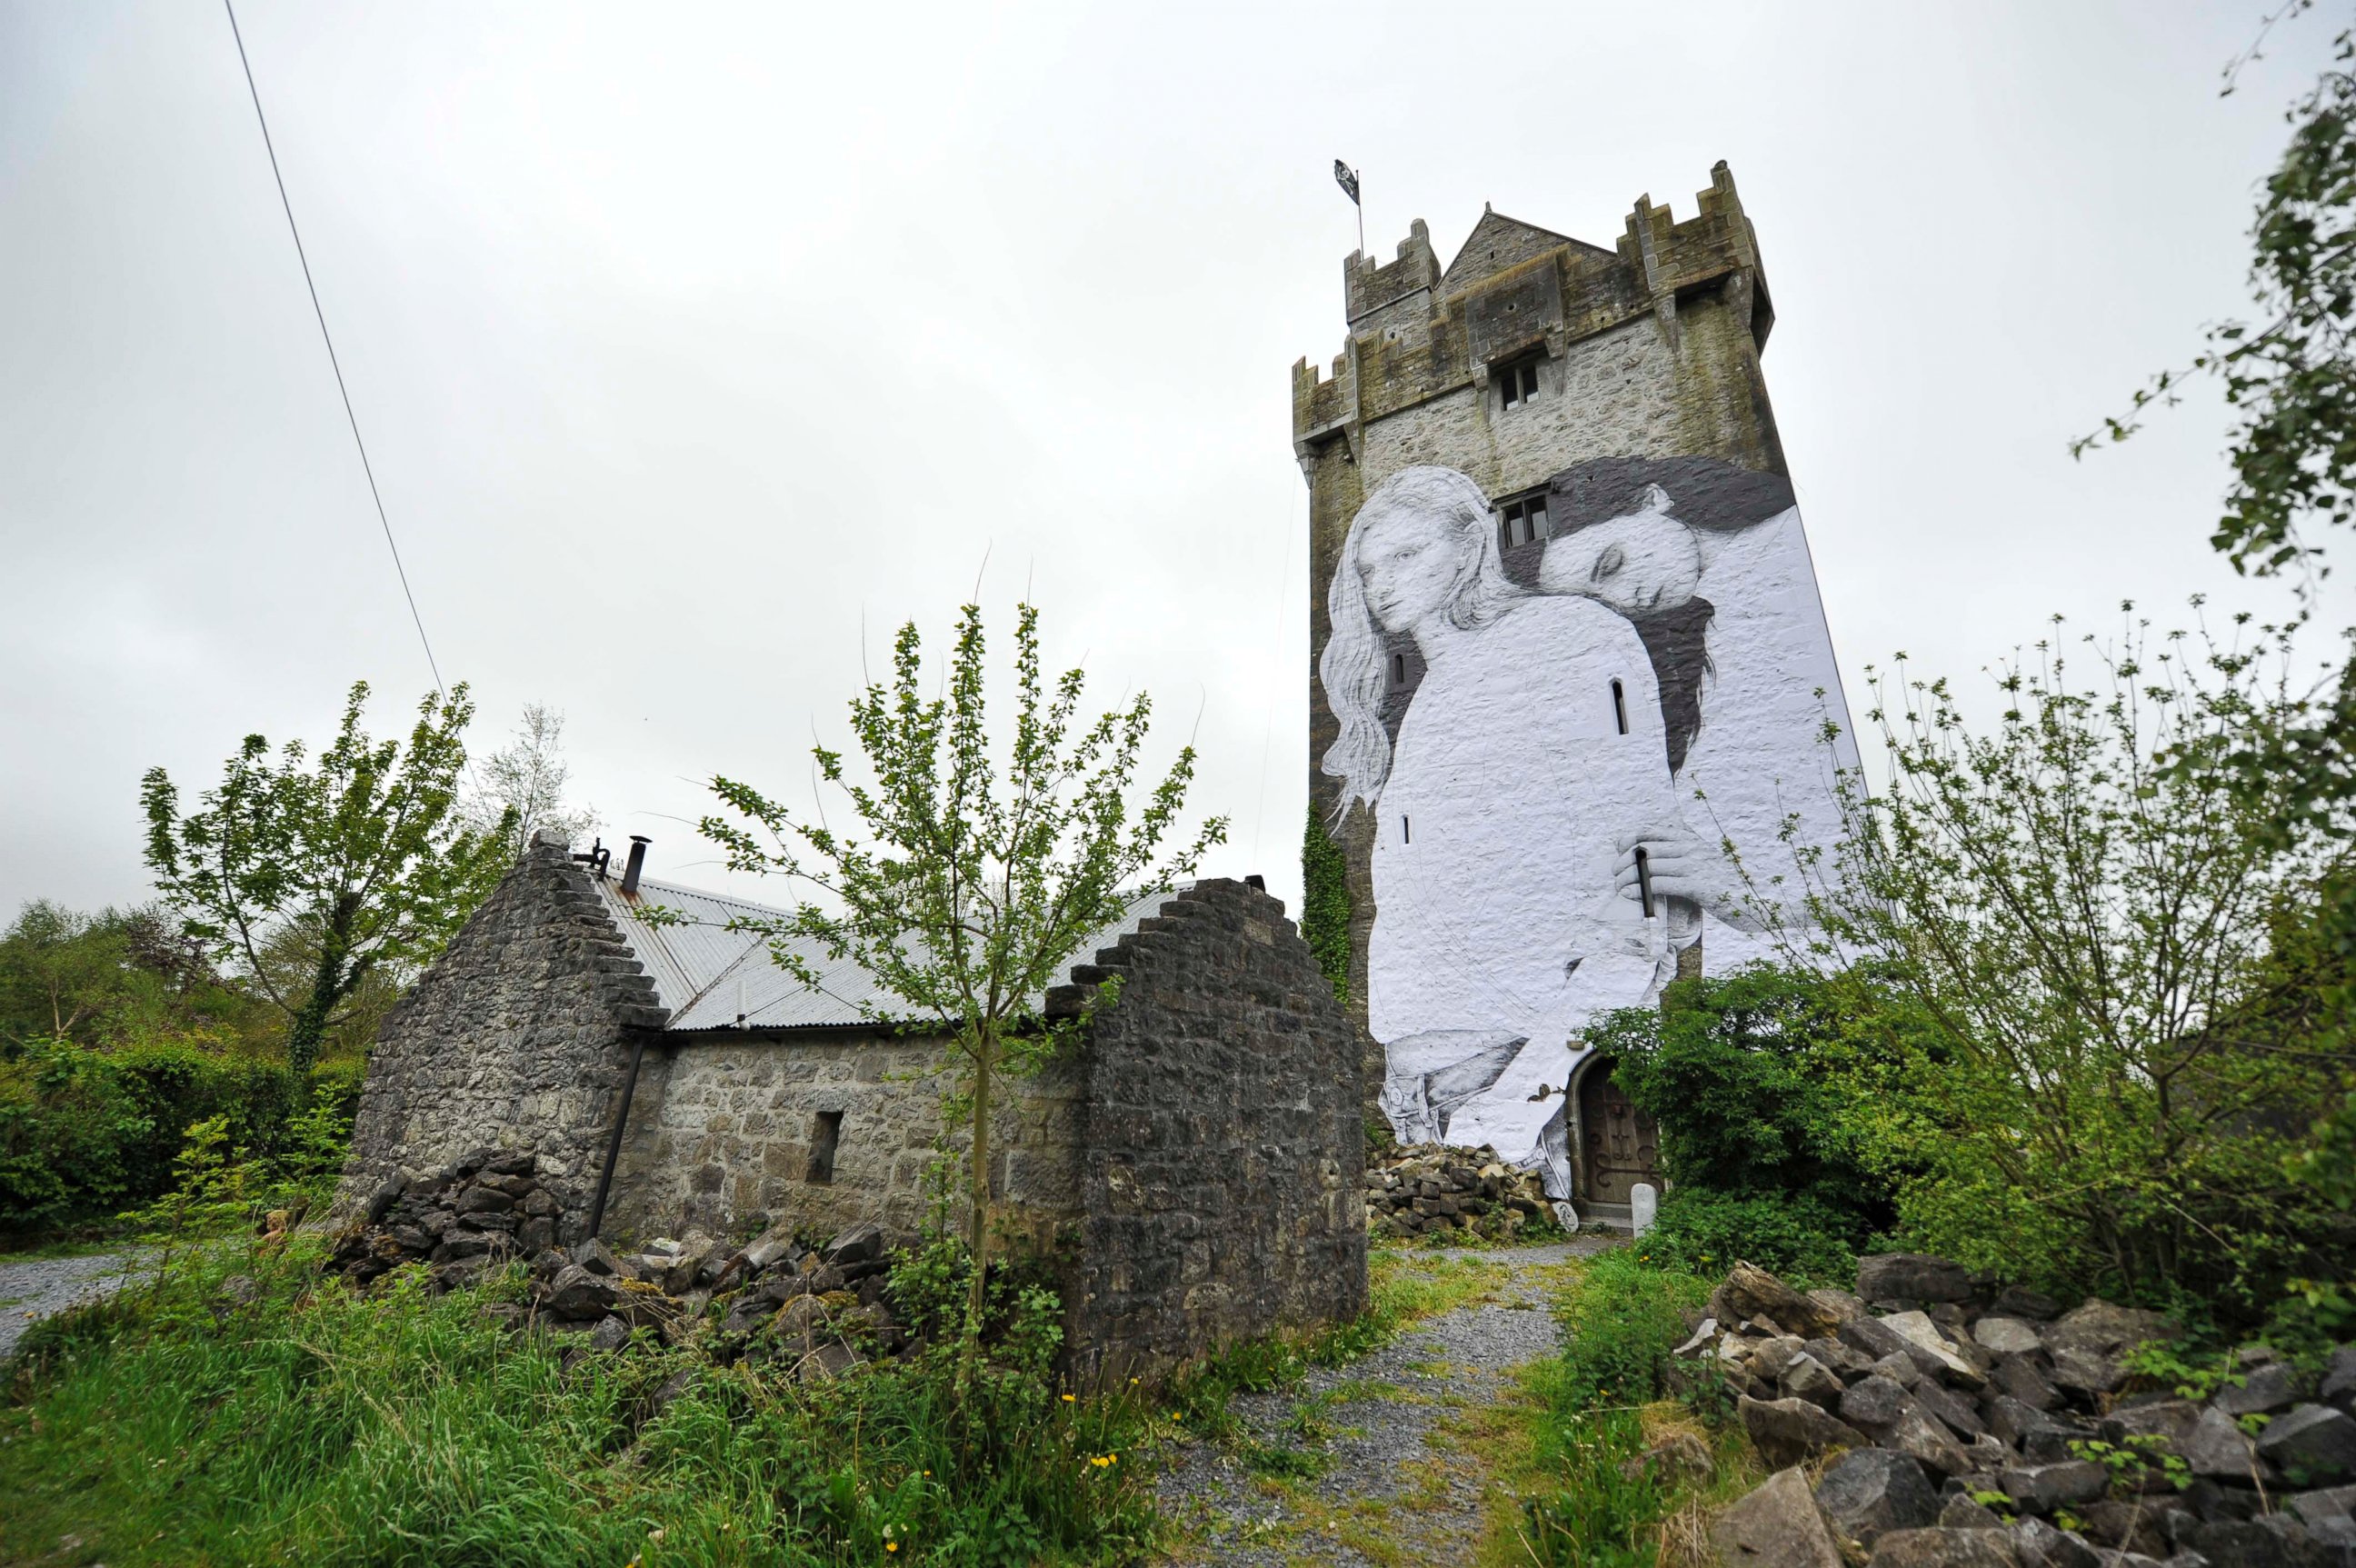 PHOTO: A 50 foot mural created by artist Joe Caslin stands on the side of Caherkinmonwee Castle, promoting the Yes campaign in favor of same-sex marriage, on May 22, 2015 in Galway, Ireland.